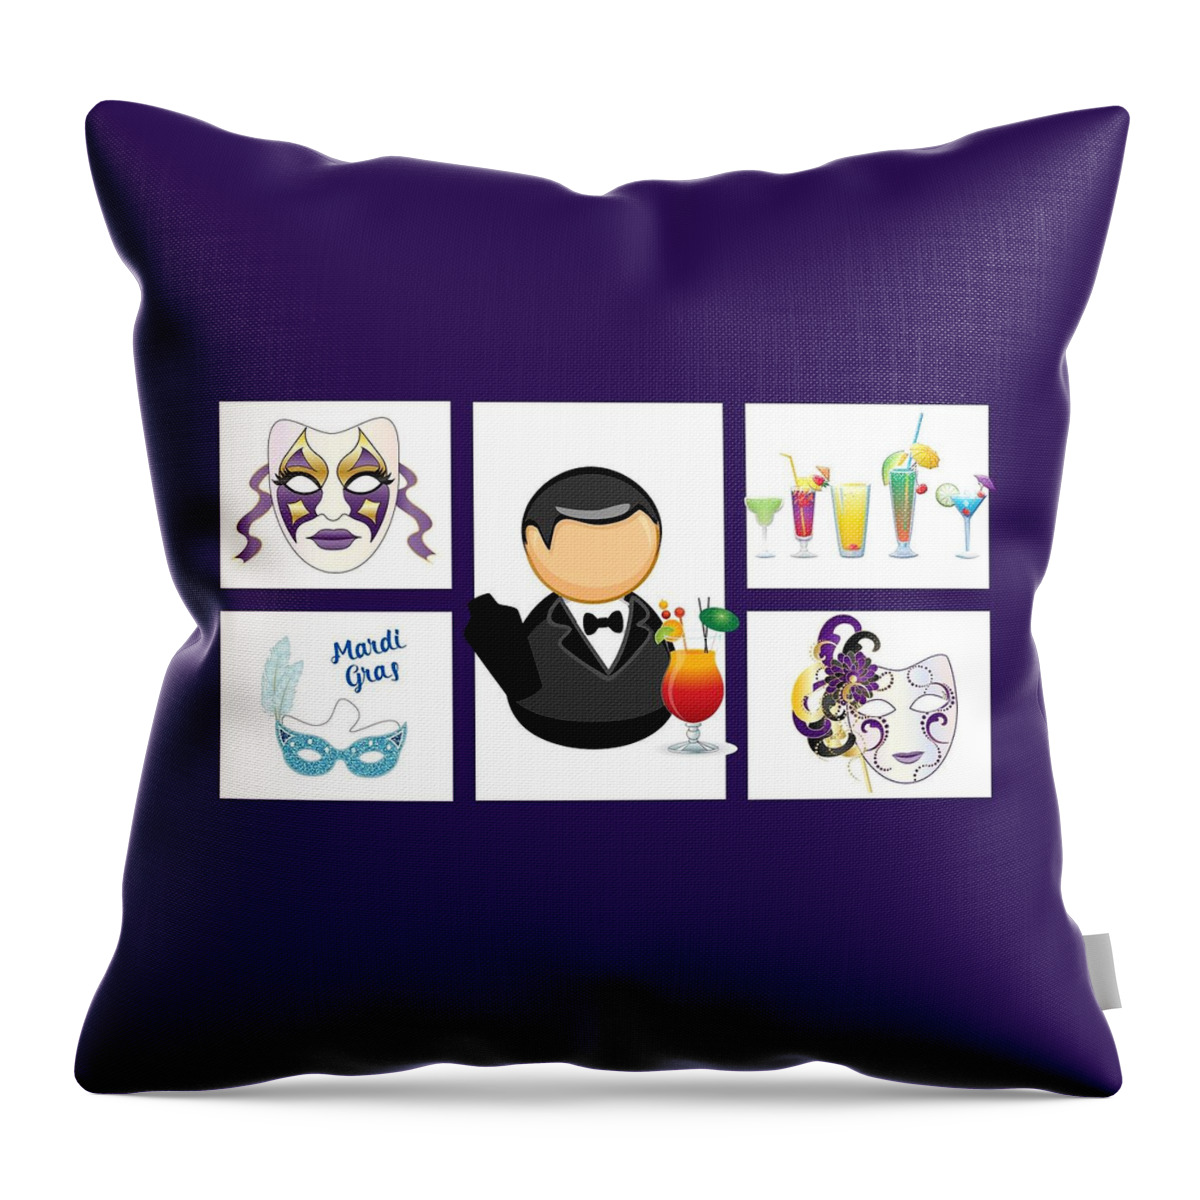 The Images Use Traditional Mardi Gras Masks Celebratory Drinks Handed Out By The Illustration Of A Bartender In The Center.. Throw Pillow featuring the digital art Mardi Gras Illustrated by Nancy Ayanna Wyatt